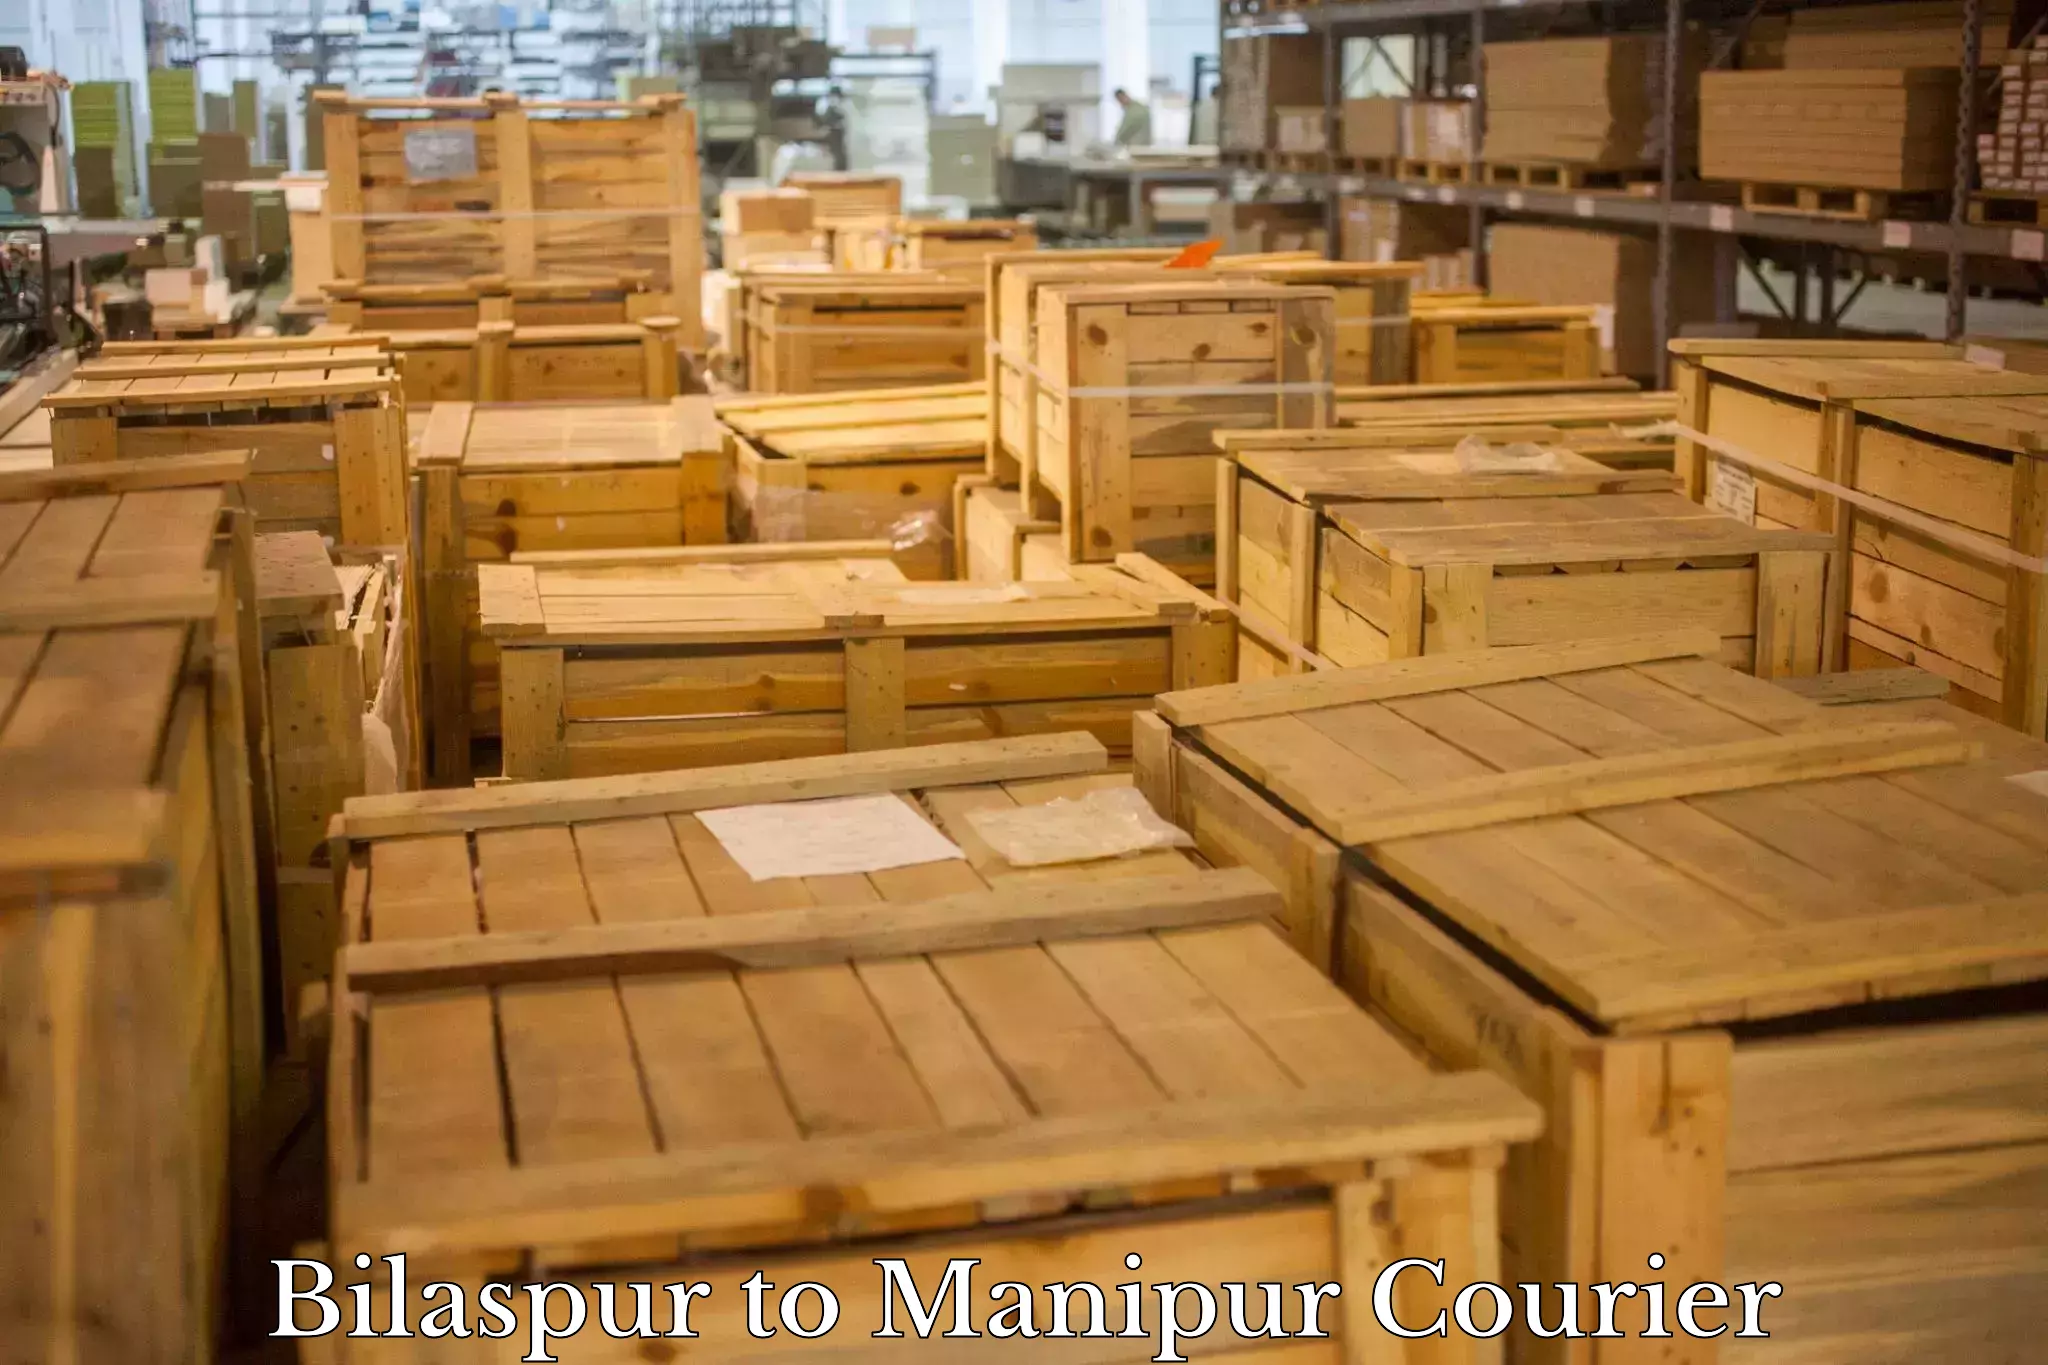 Courier service innovation Bilaspur to Manipur